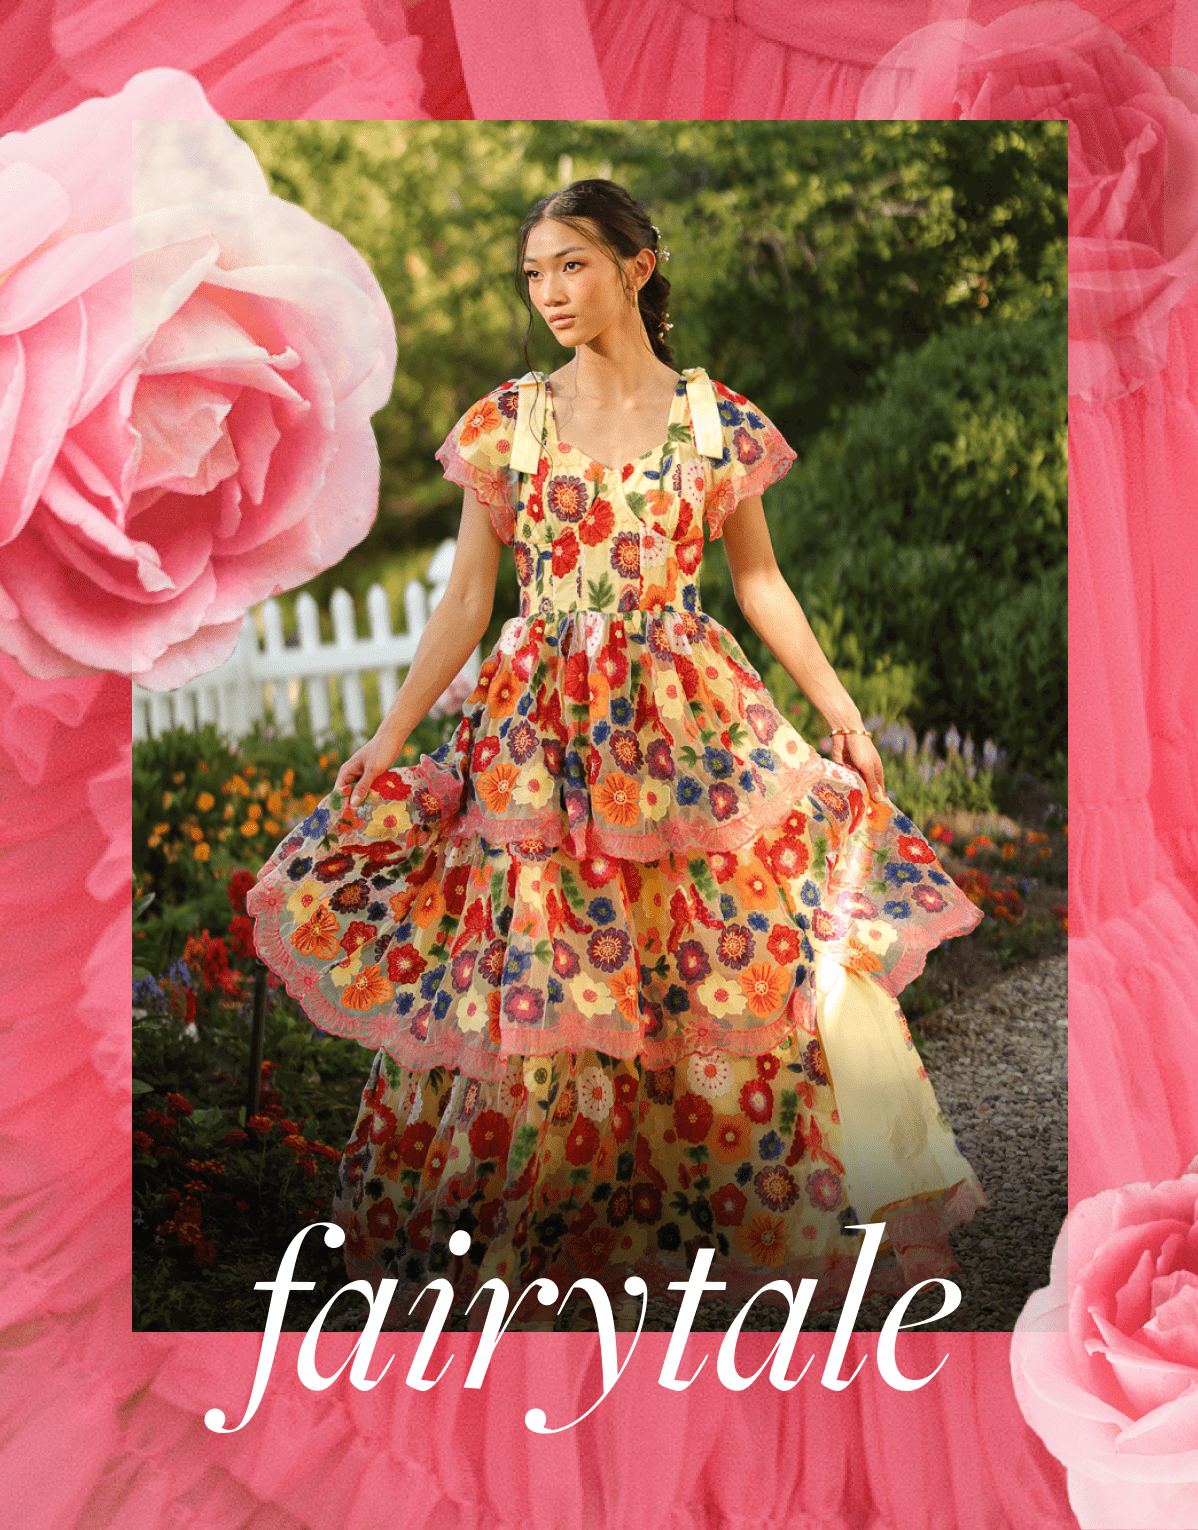 Shop now for Fairytale Chapter 2!